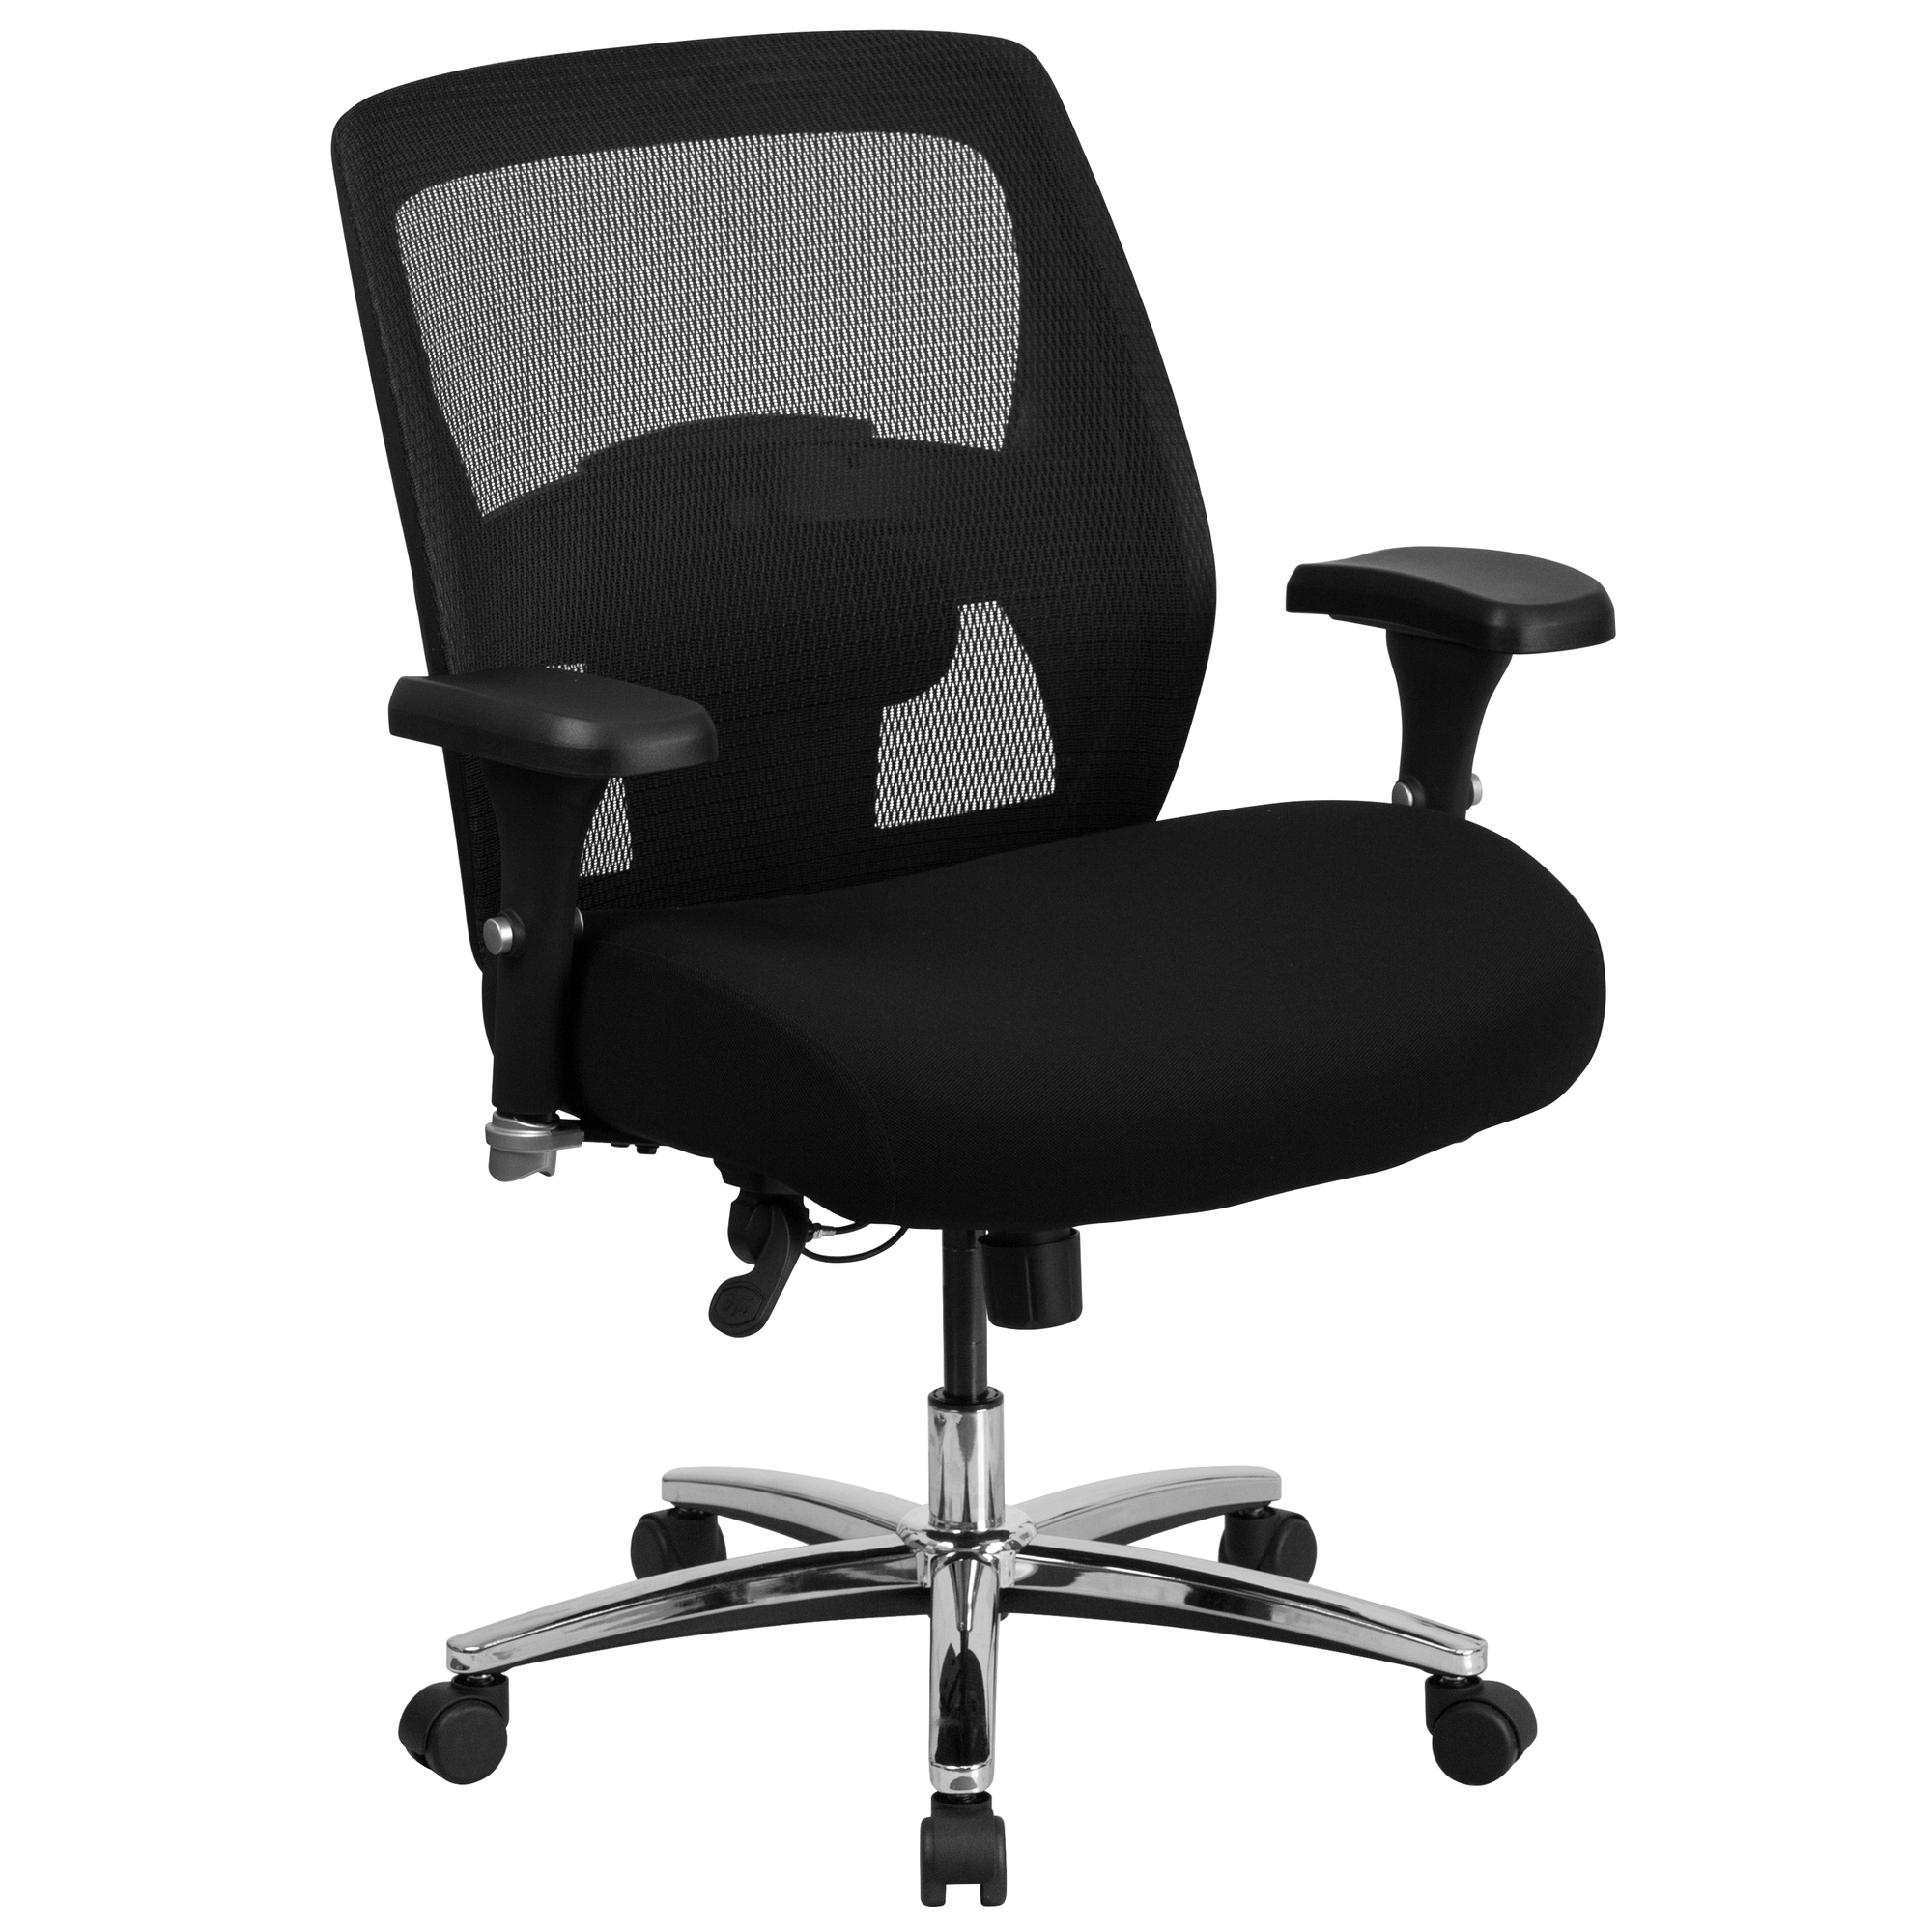 Flash Furniture, Big Tall 500 lb. Rated Black Mesh Office Chair, Primary Color Black, Included (qty.) 1, Model GO993